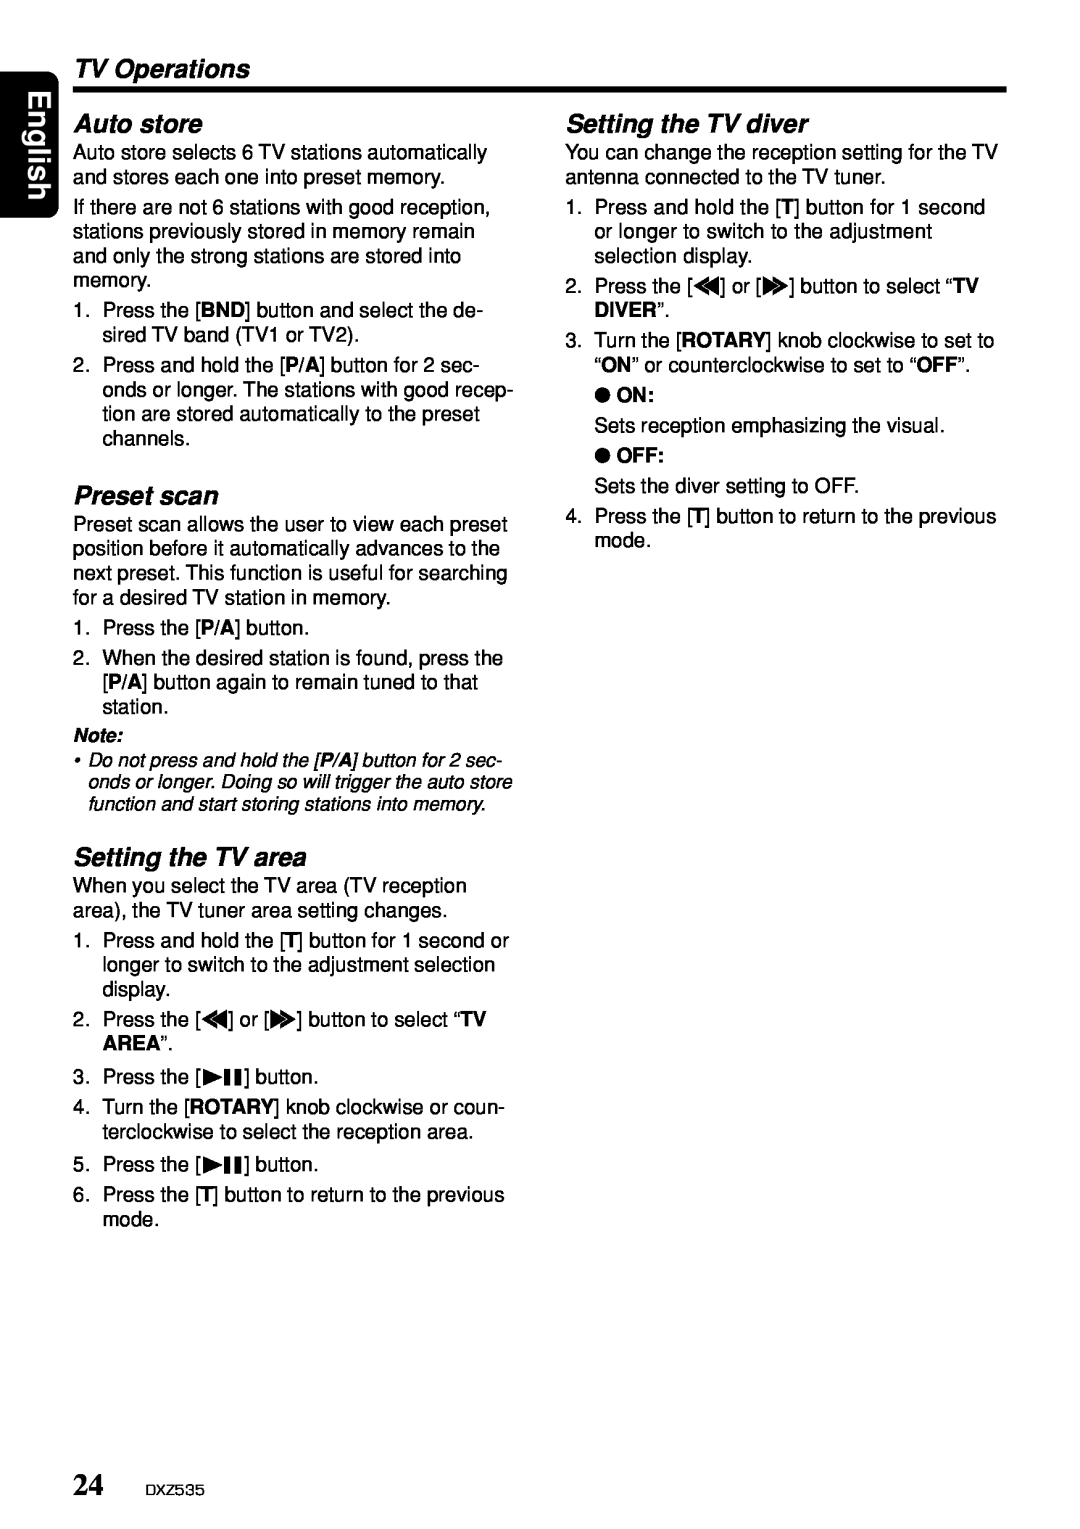 Clarion DXZ535 owner manual TV Operations, Setting the TV diver, Setting the TV area, English, Auto store, Preset scan 